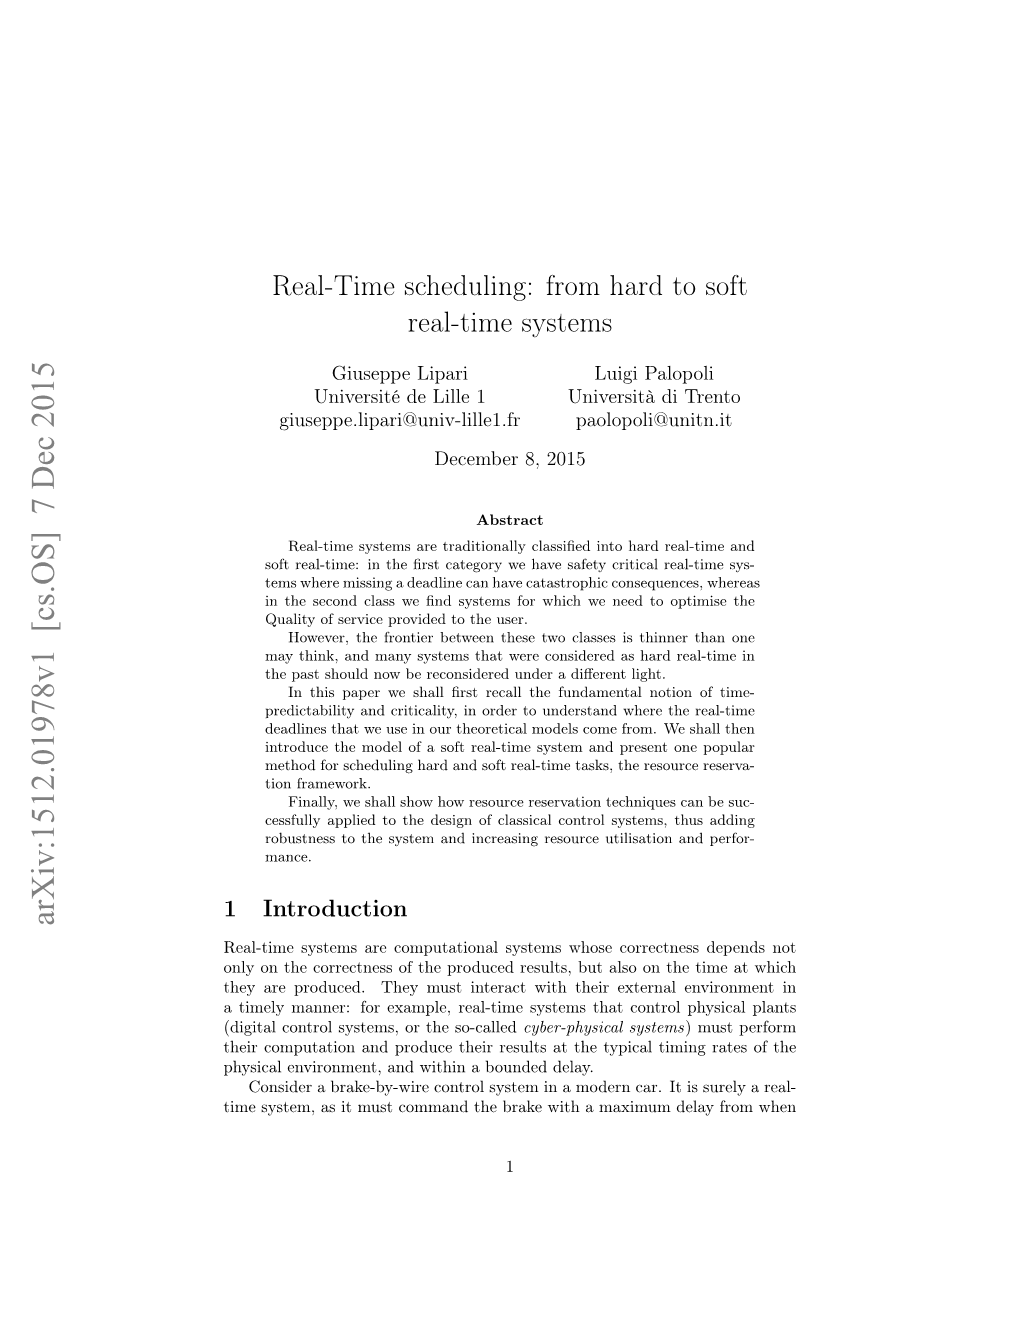 Real-Time Scheduling: from Hard to Soft Real-Time Systems